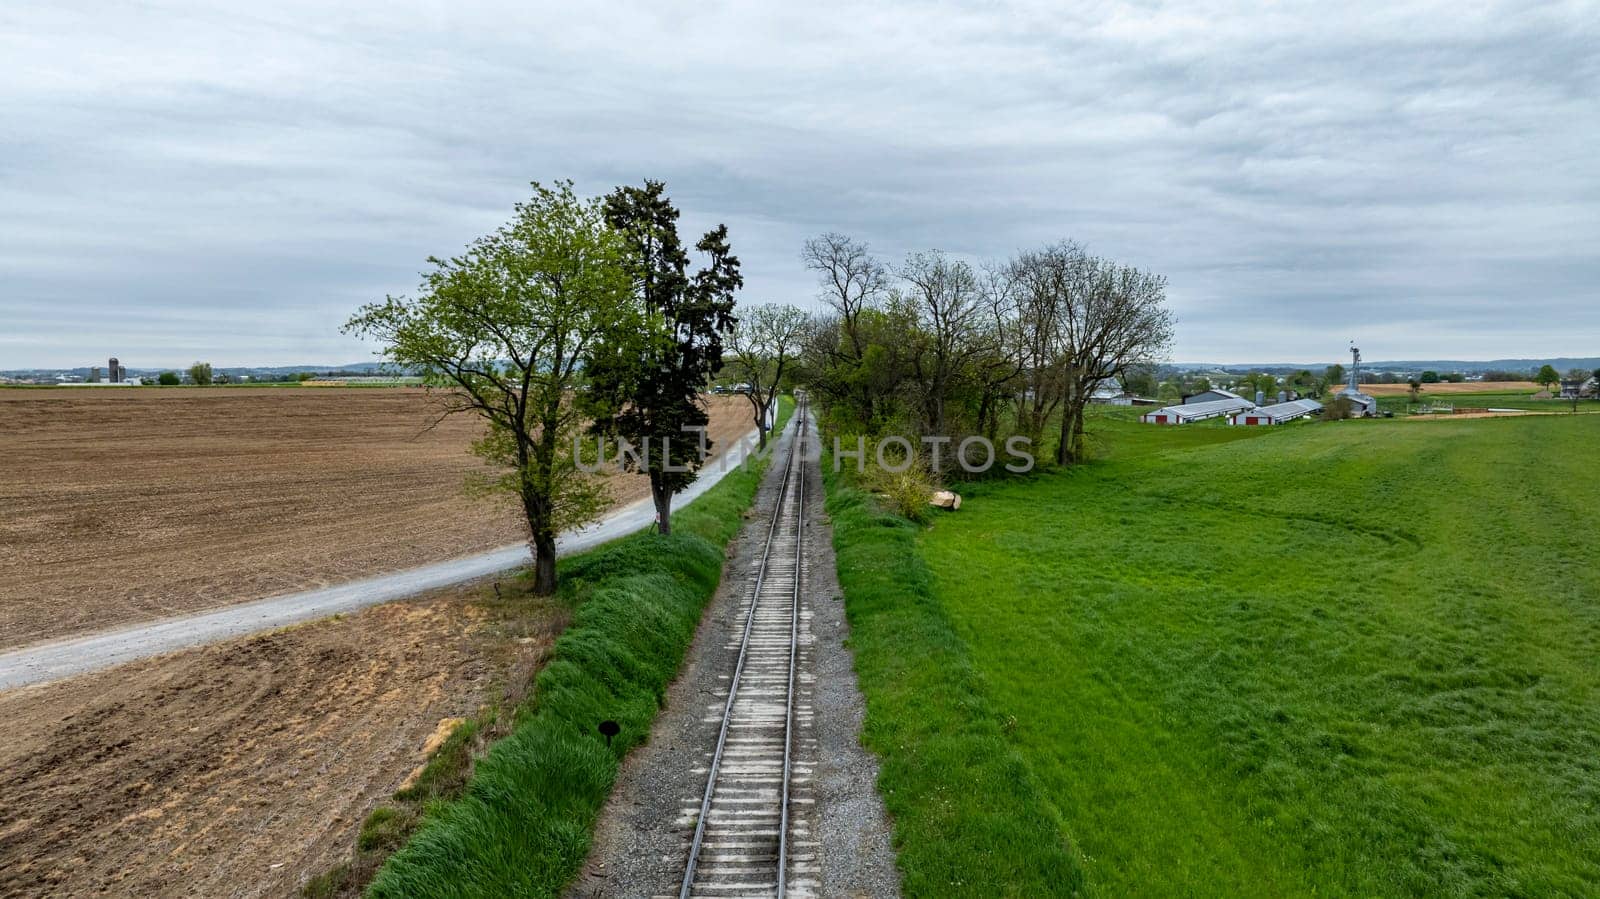 A train is traveling down a track next to a field. The train is black and steam is coming out of the front